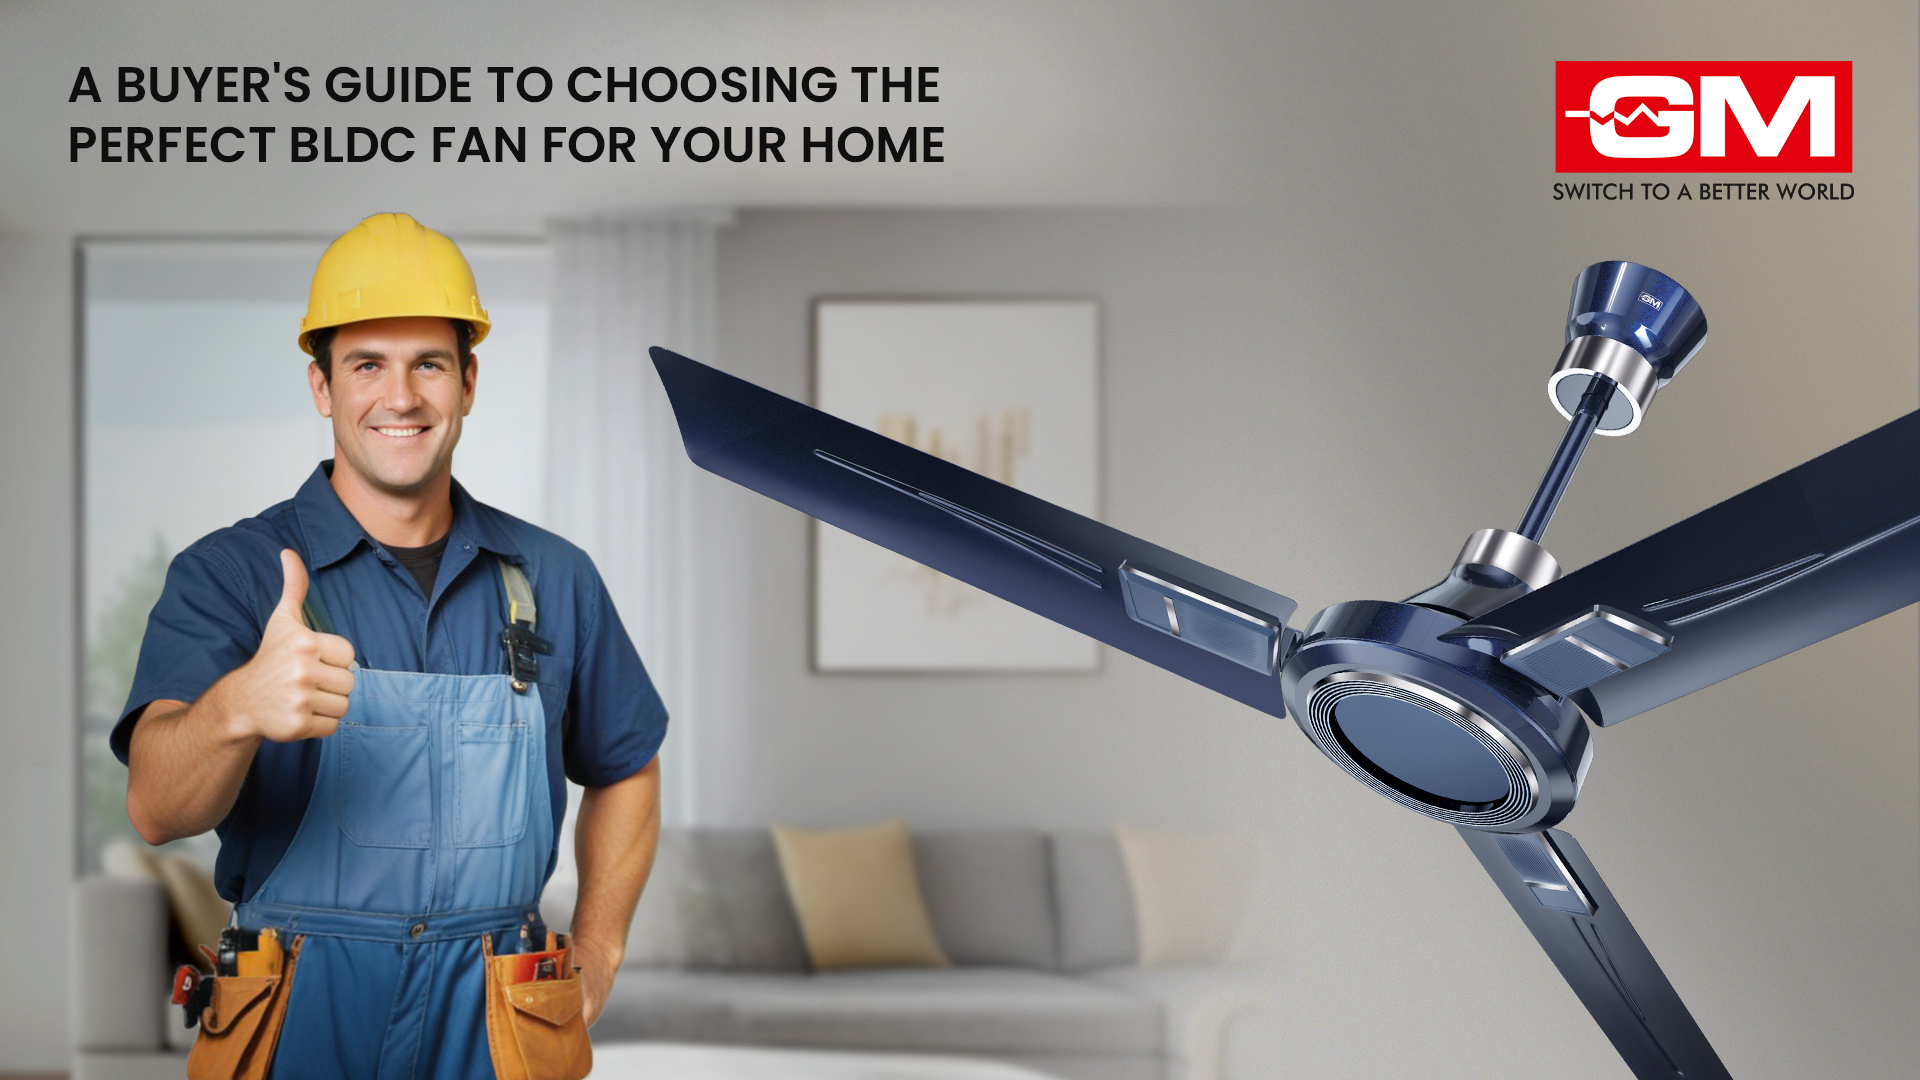 A Buyer's Guide to Choosing the Perfect BLDC Fan for Your Home